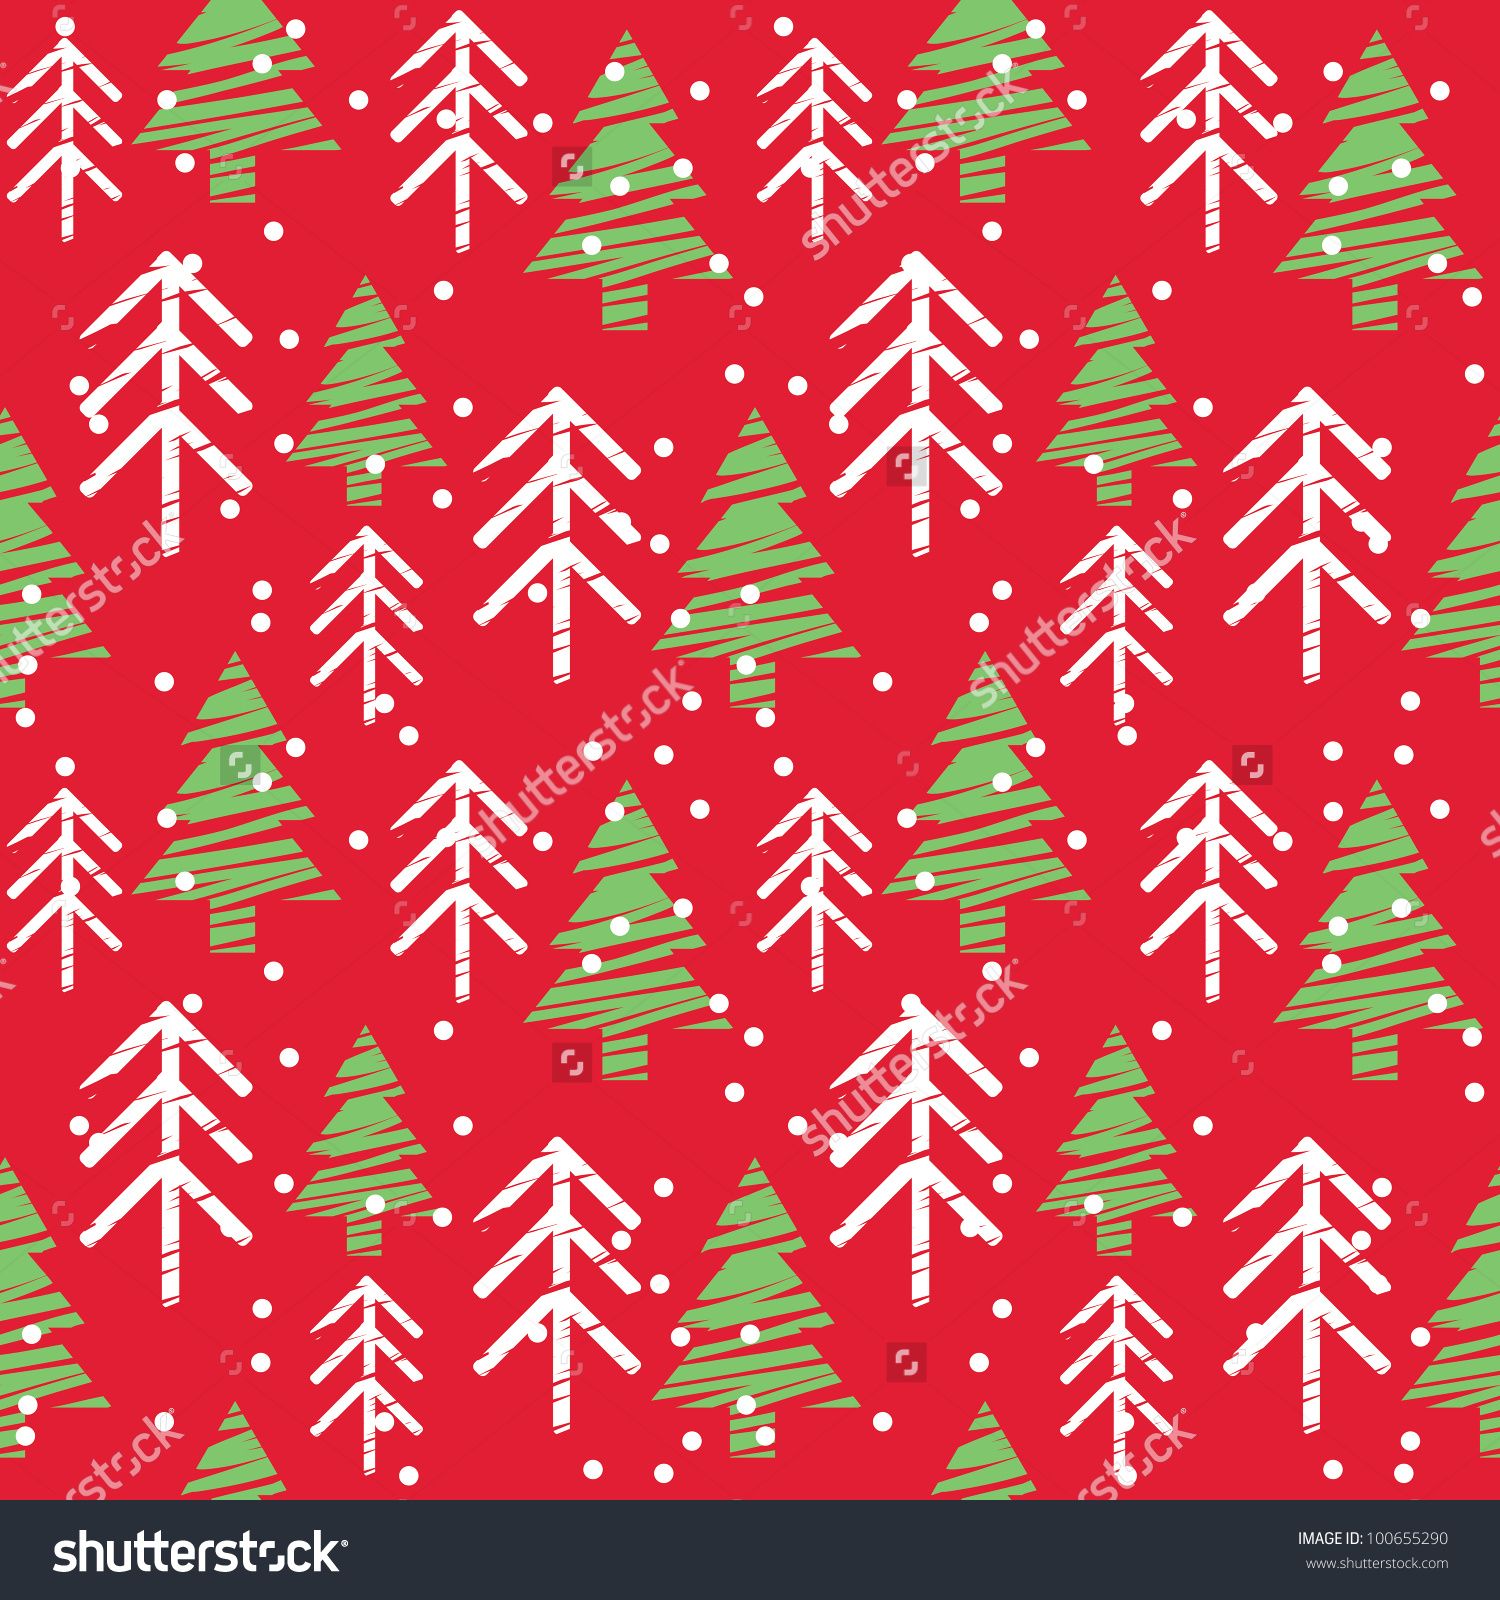 Image result for seamless christmas pattern | C H R I S T M A S ...